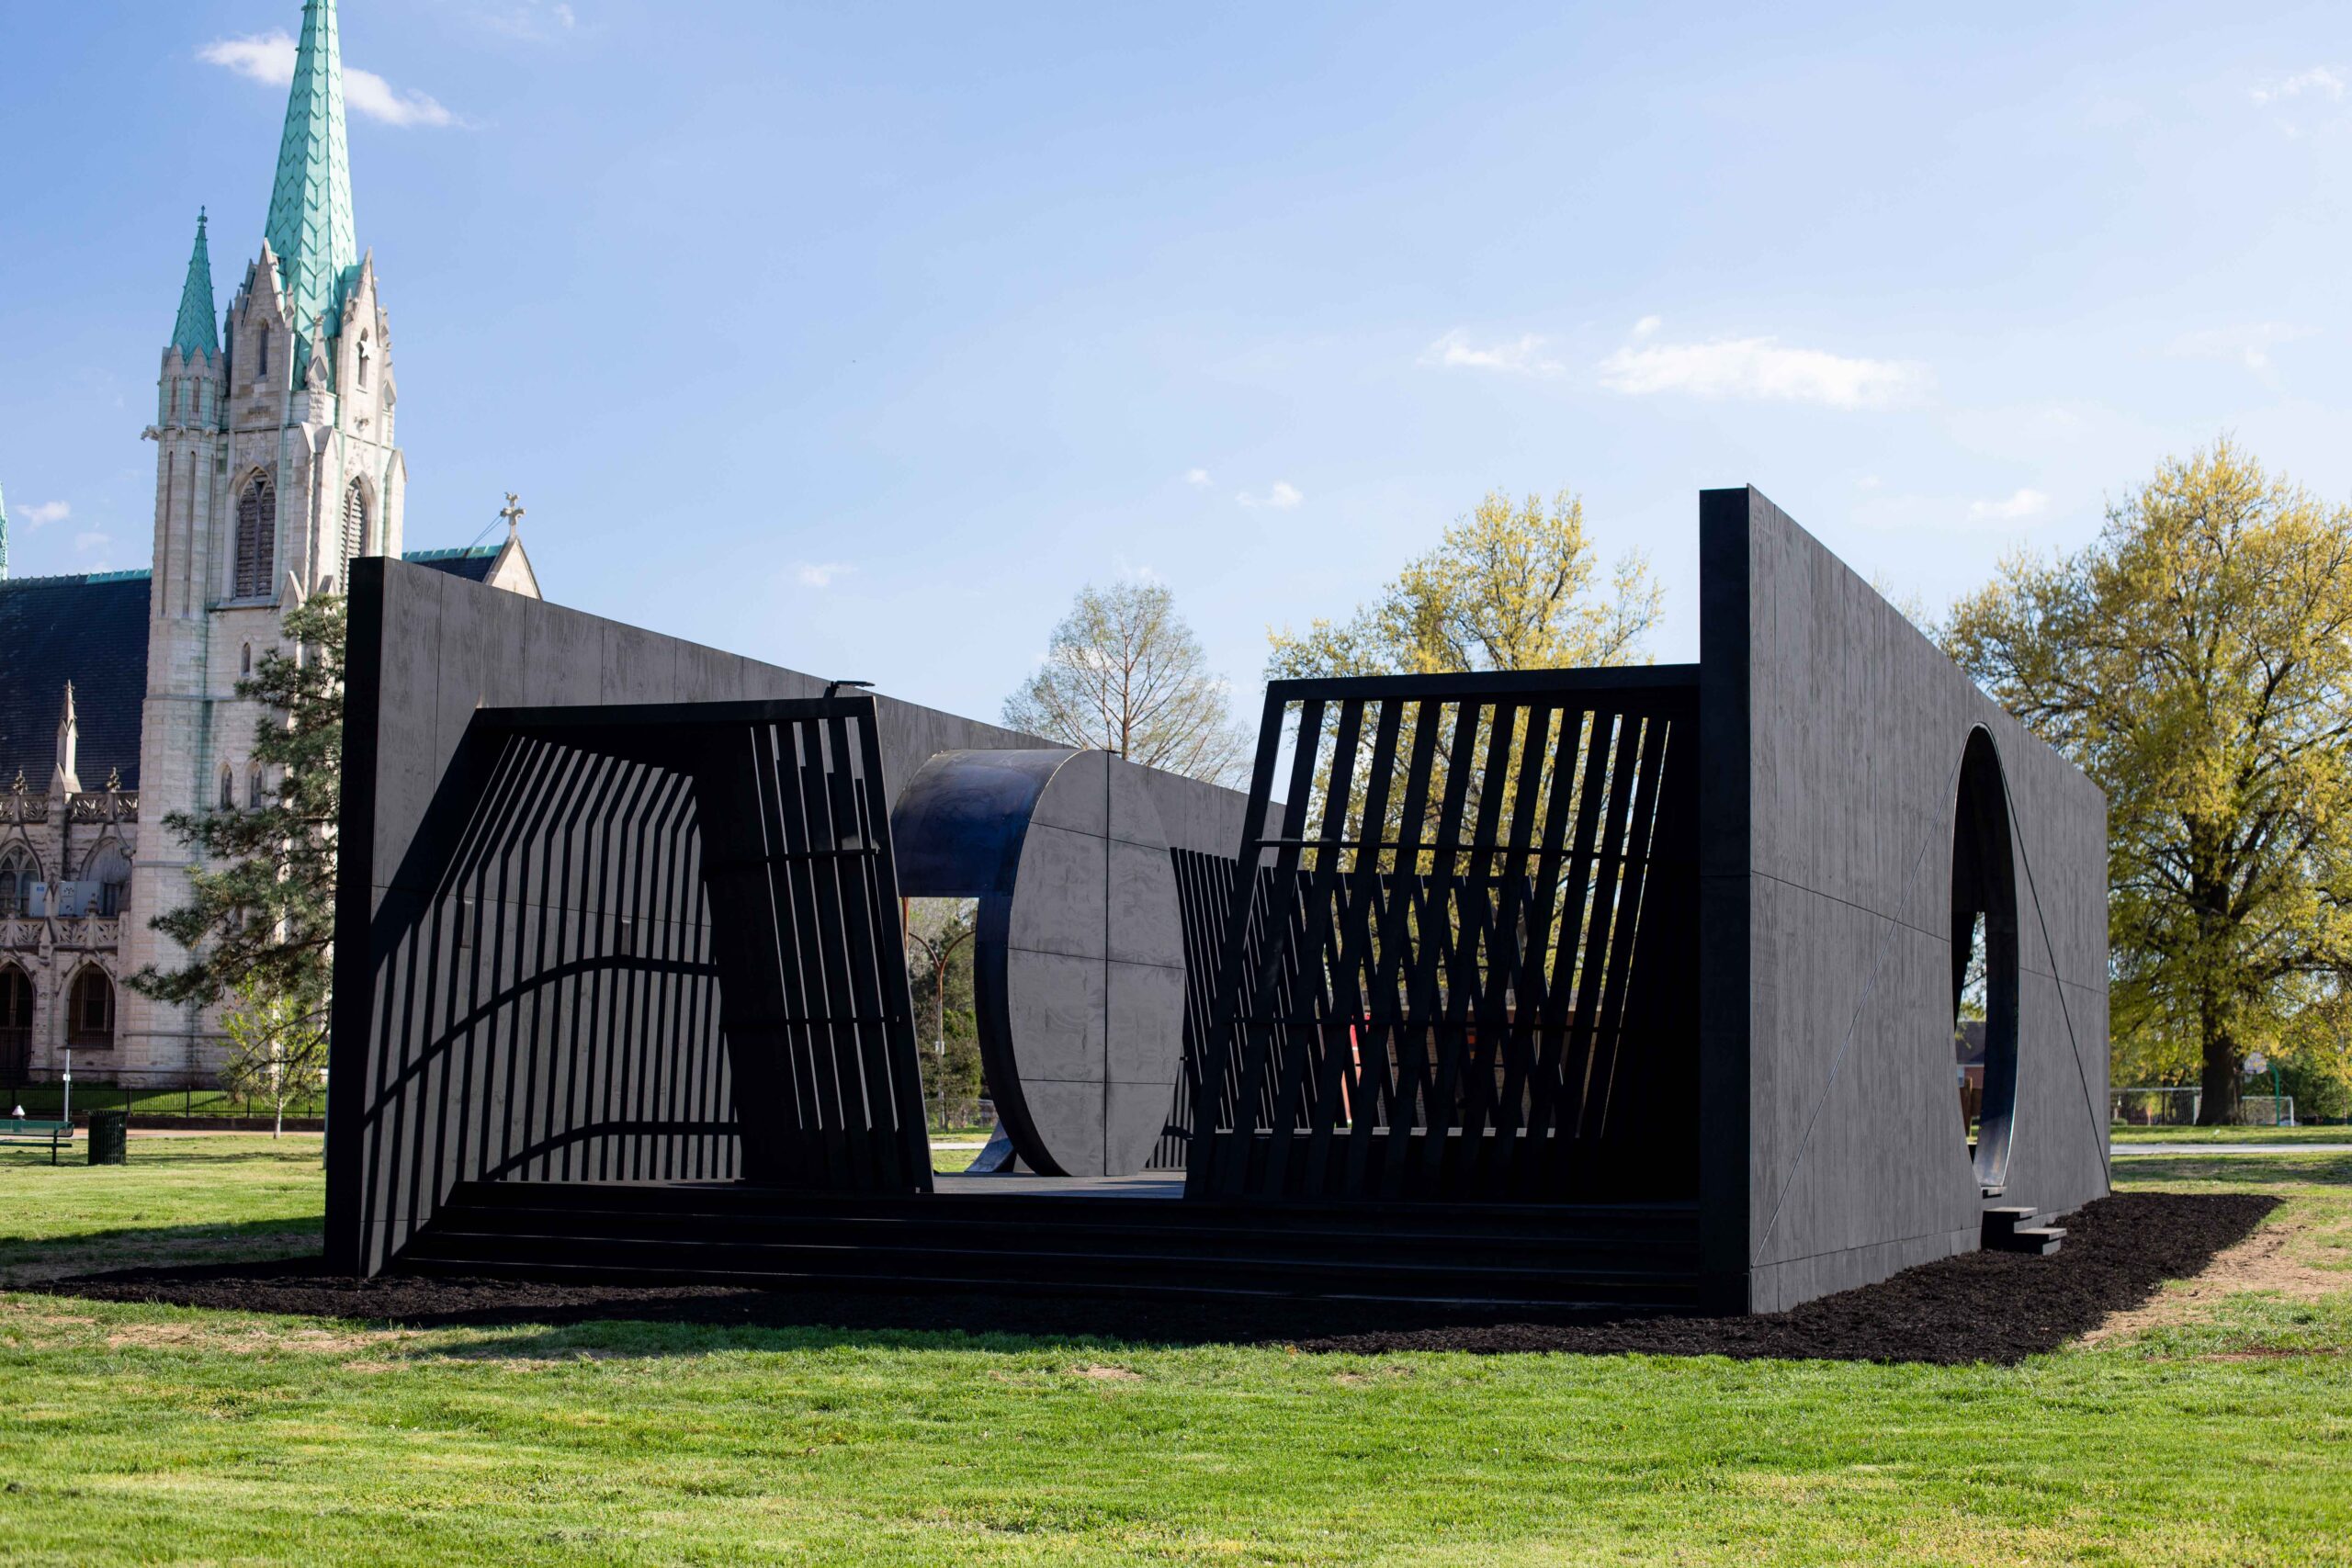 A photo of a black geometric wooden structure located on a public green space, with a church in the background.